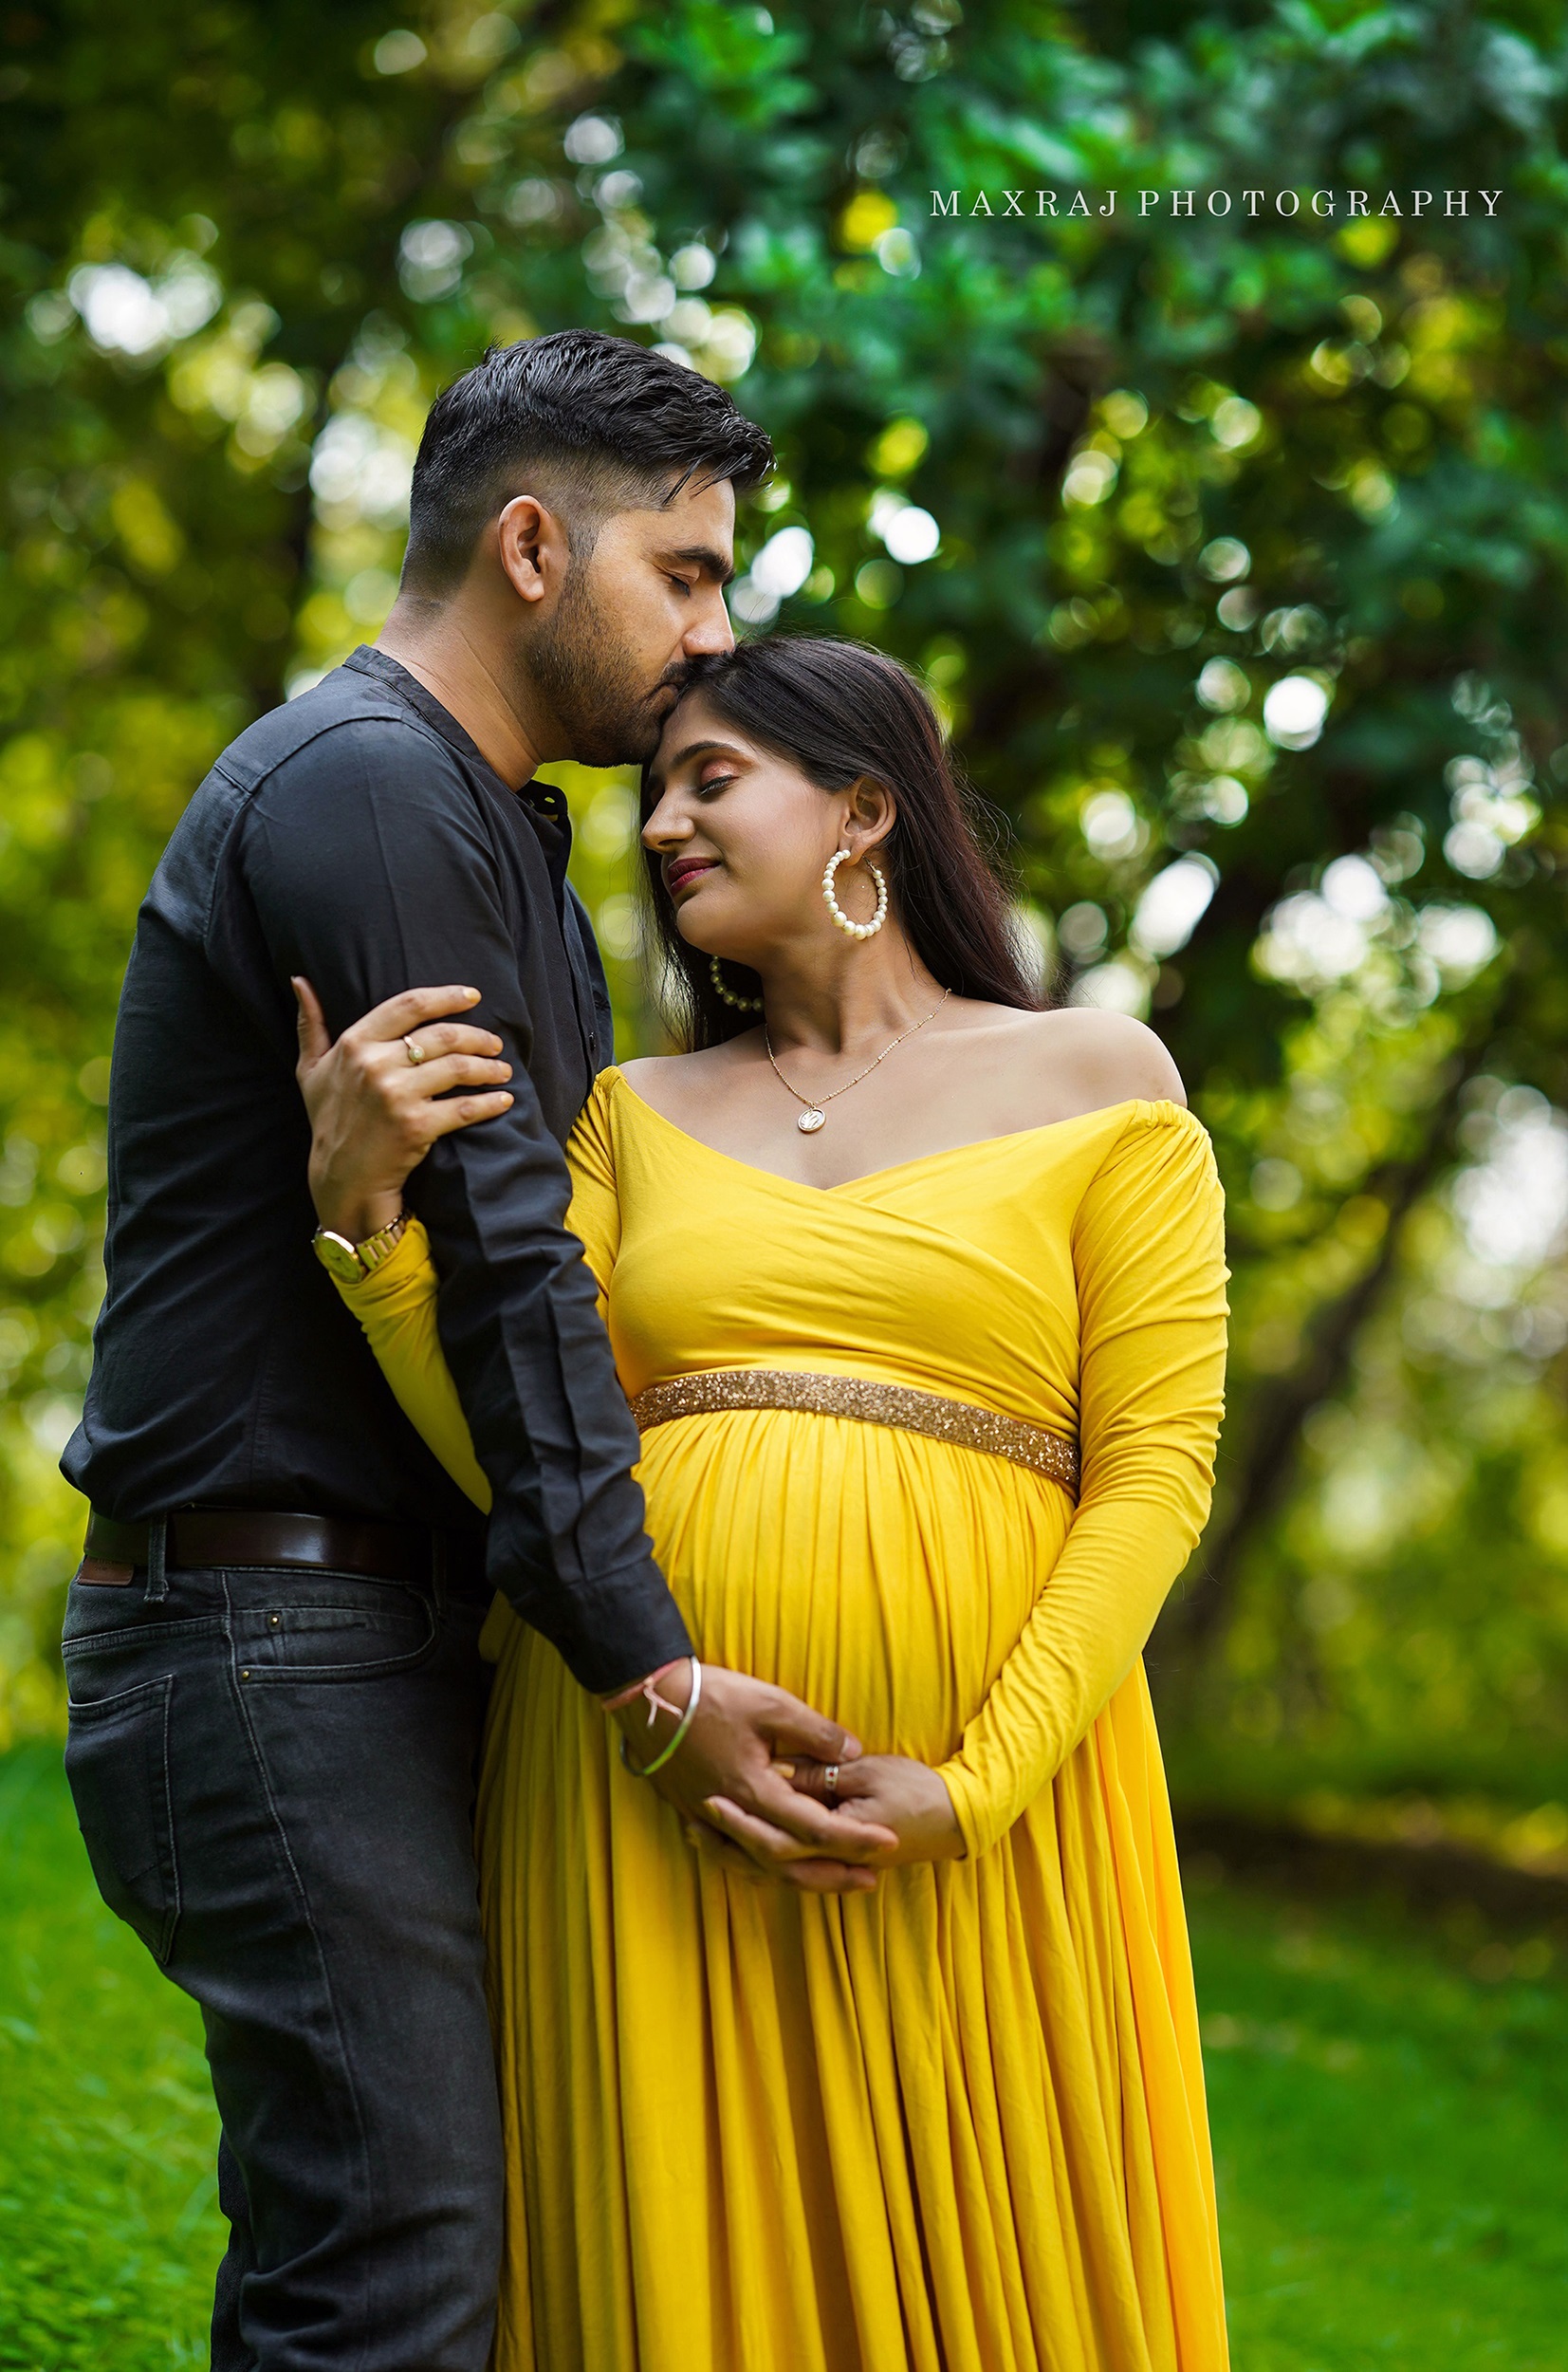 How to Plan a Pregnancy Announcement Photoshoot with Suggested Poses |  Michelle Pantoja | Chicago Lifestyle Blog